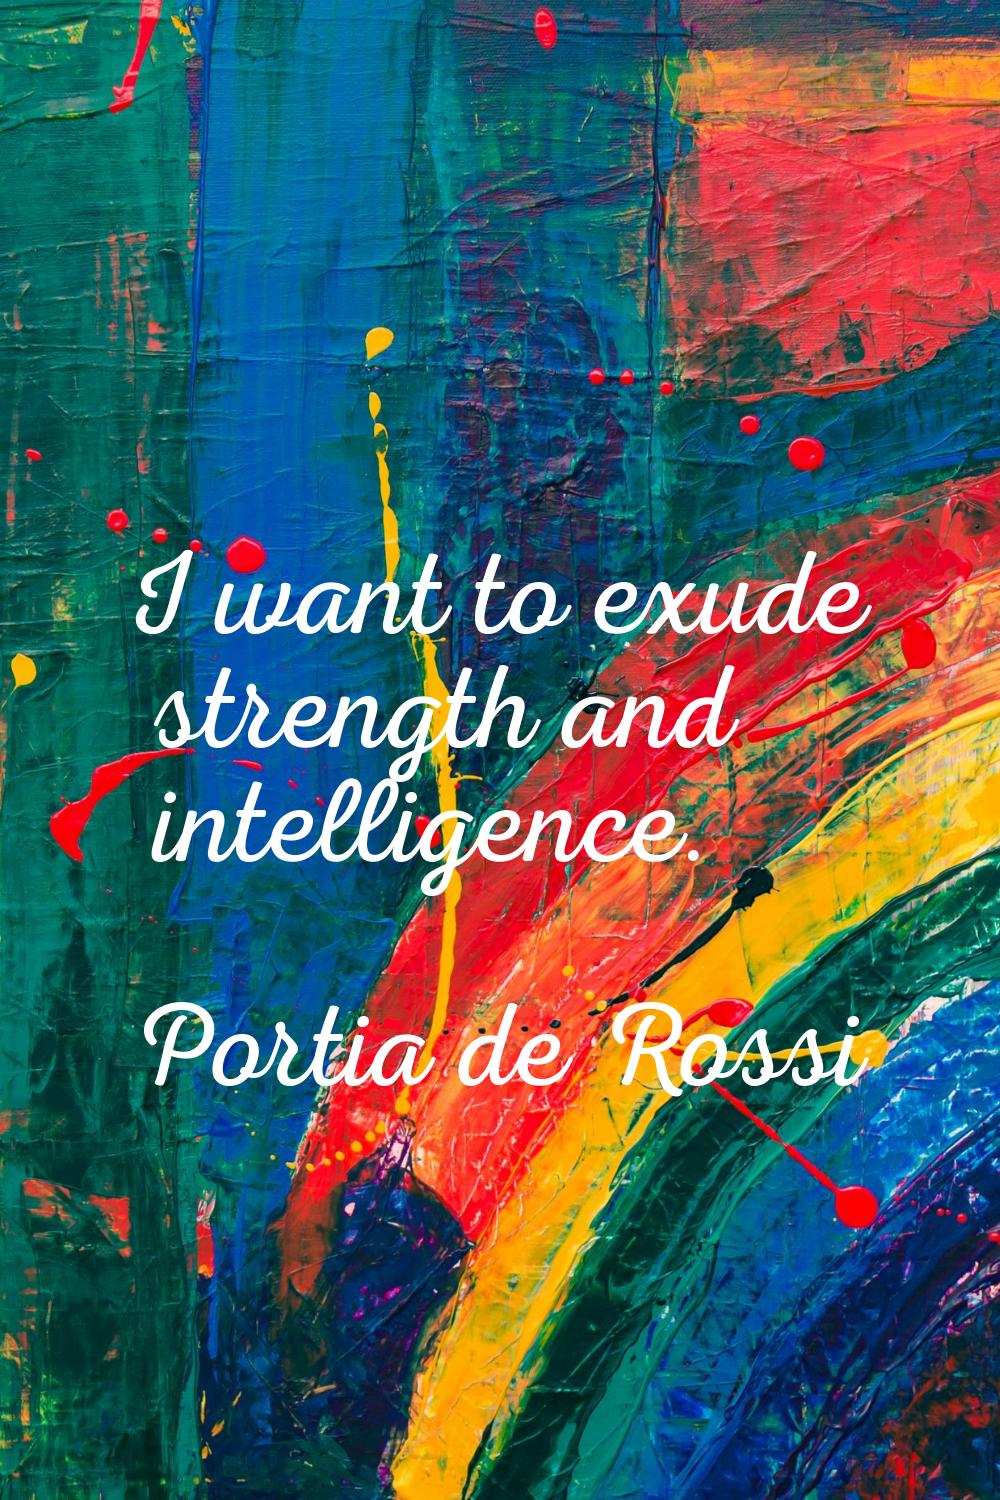 I want to exude strength and intelligence.